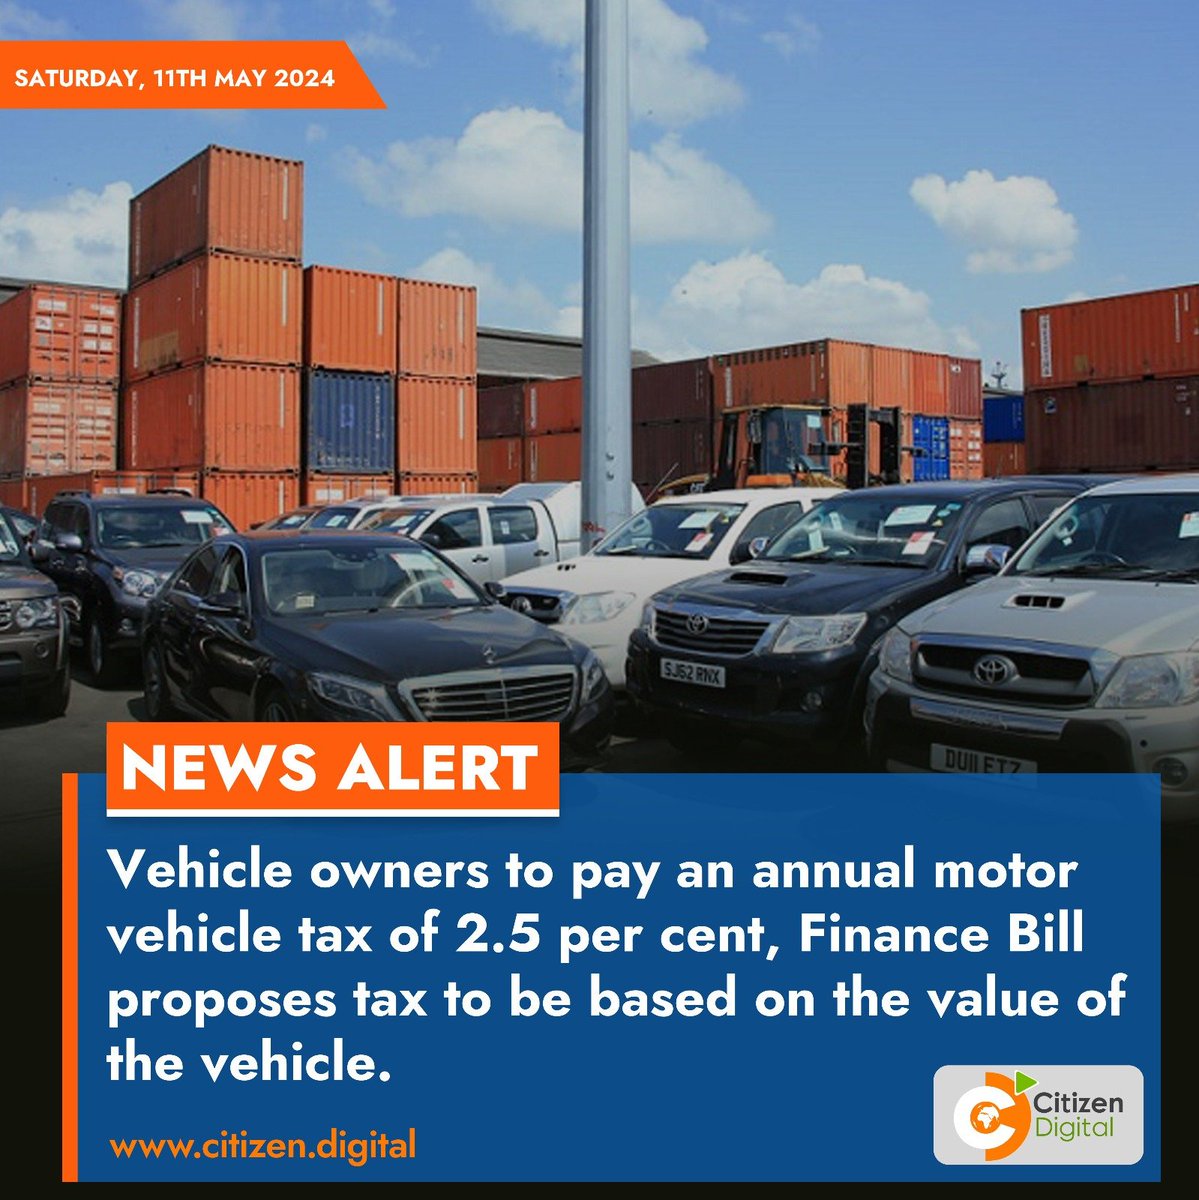 Vehicle owners to pay an annual motor vehicle tax of 2.5 per cent, Finance Bill proposes tax to be based on the value of the vehicle.